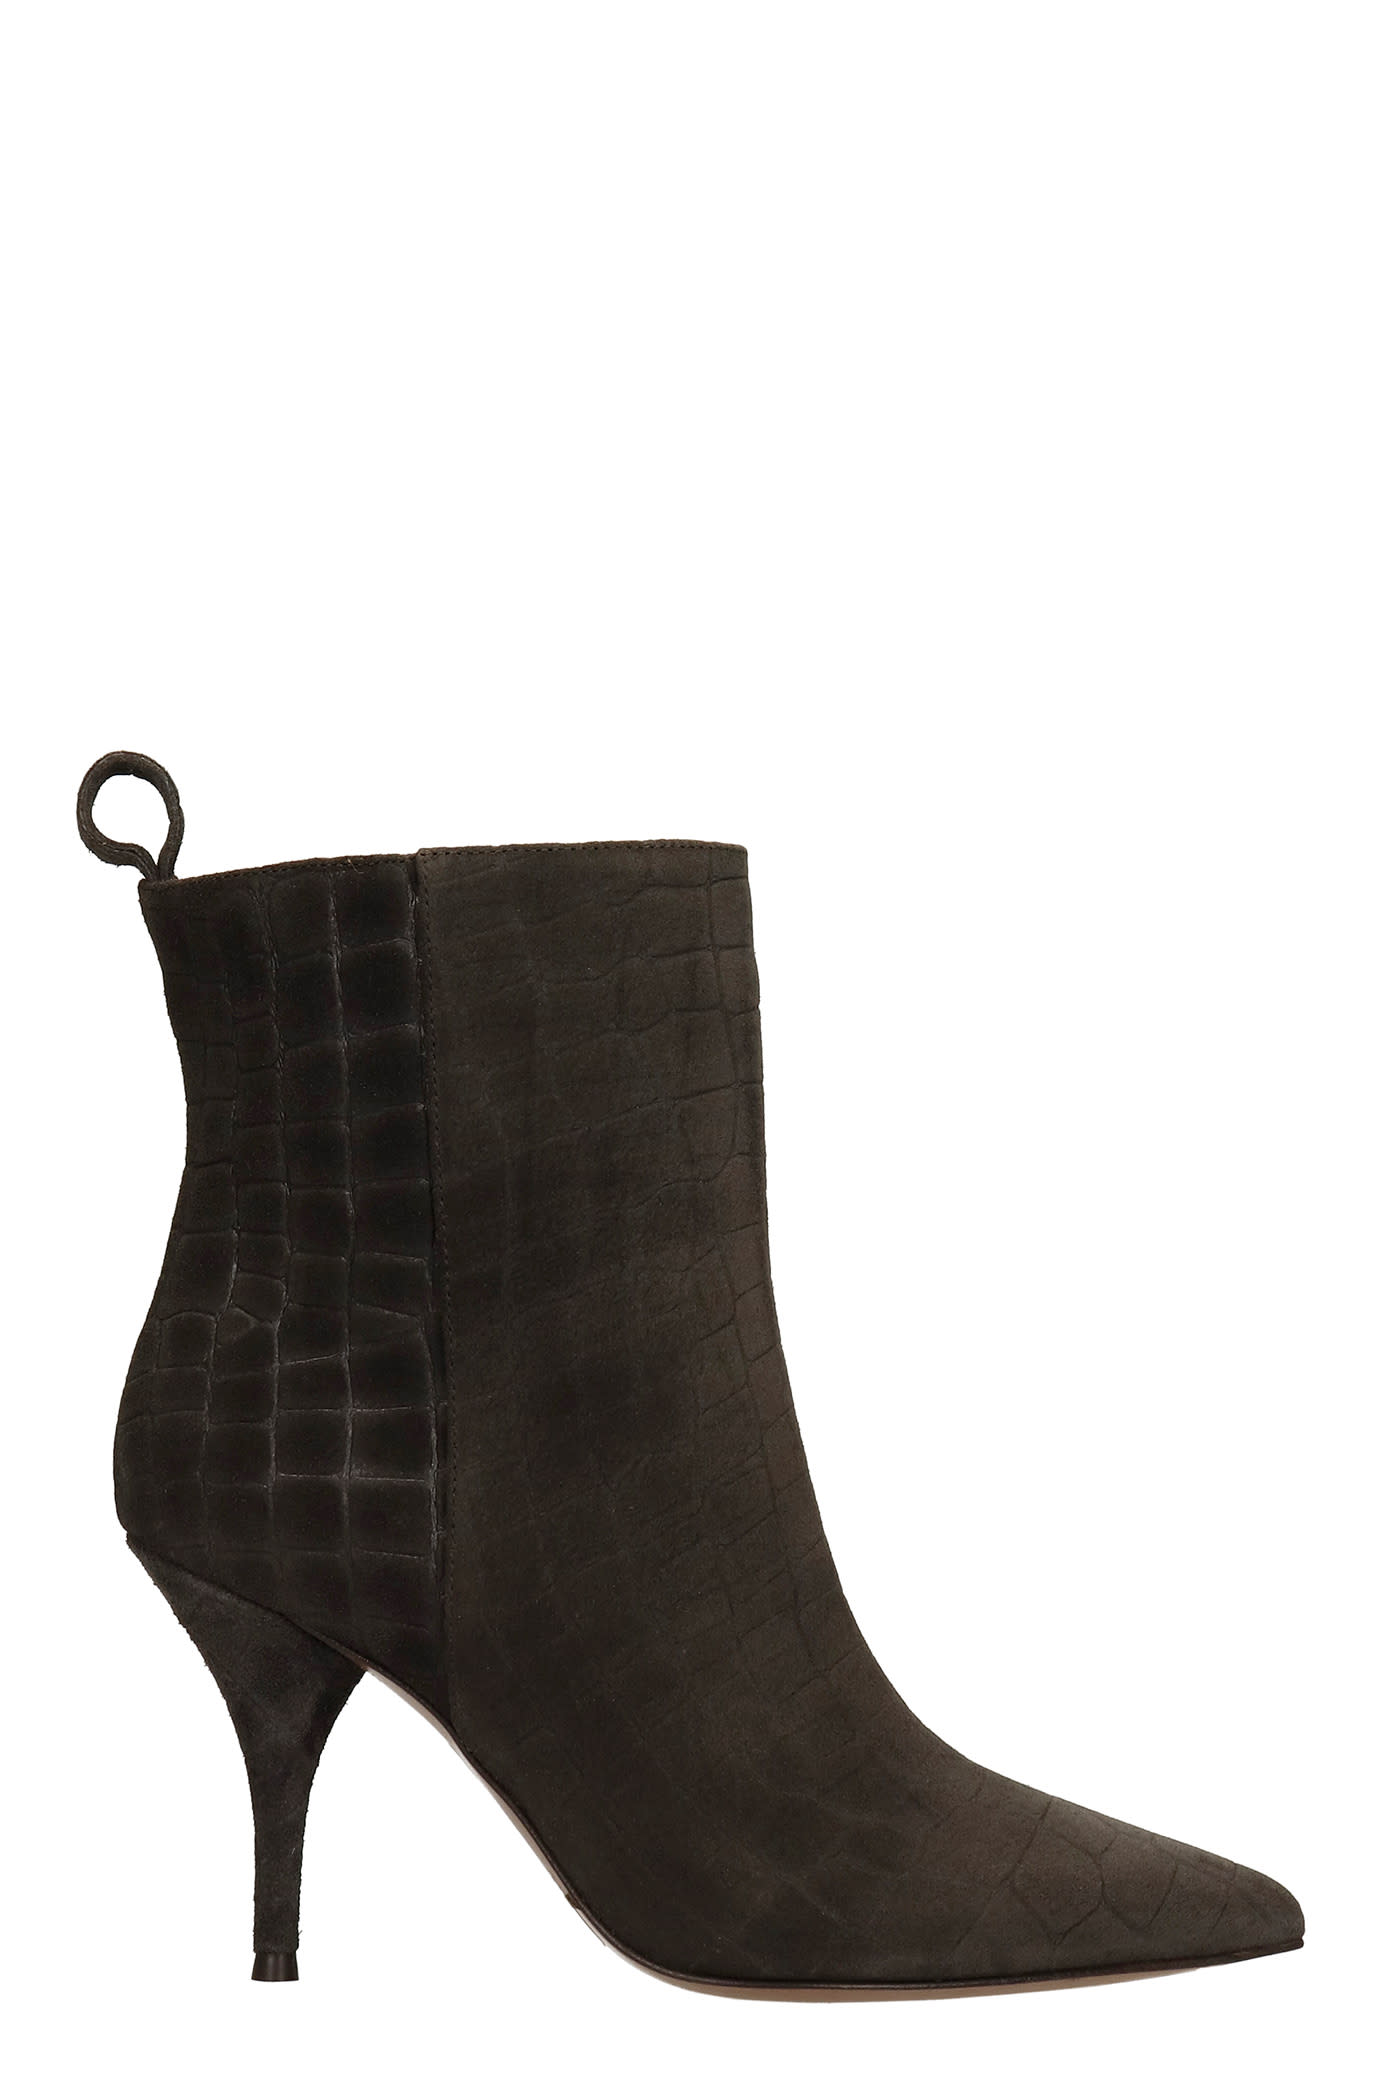 LAutre Chose High Heels Ankle Boots In Grey Suede